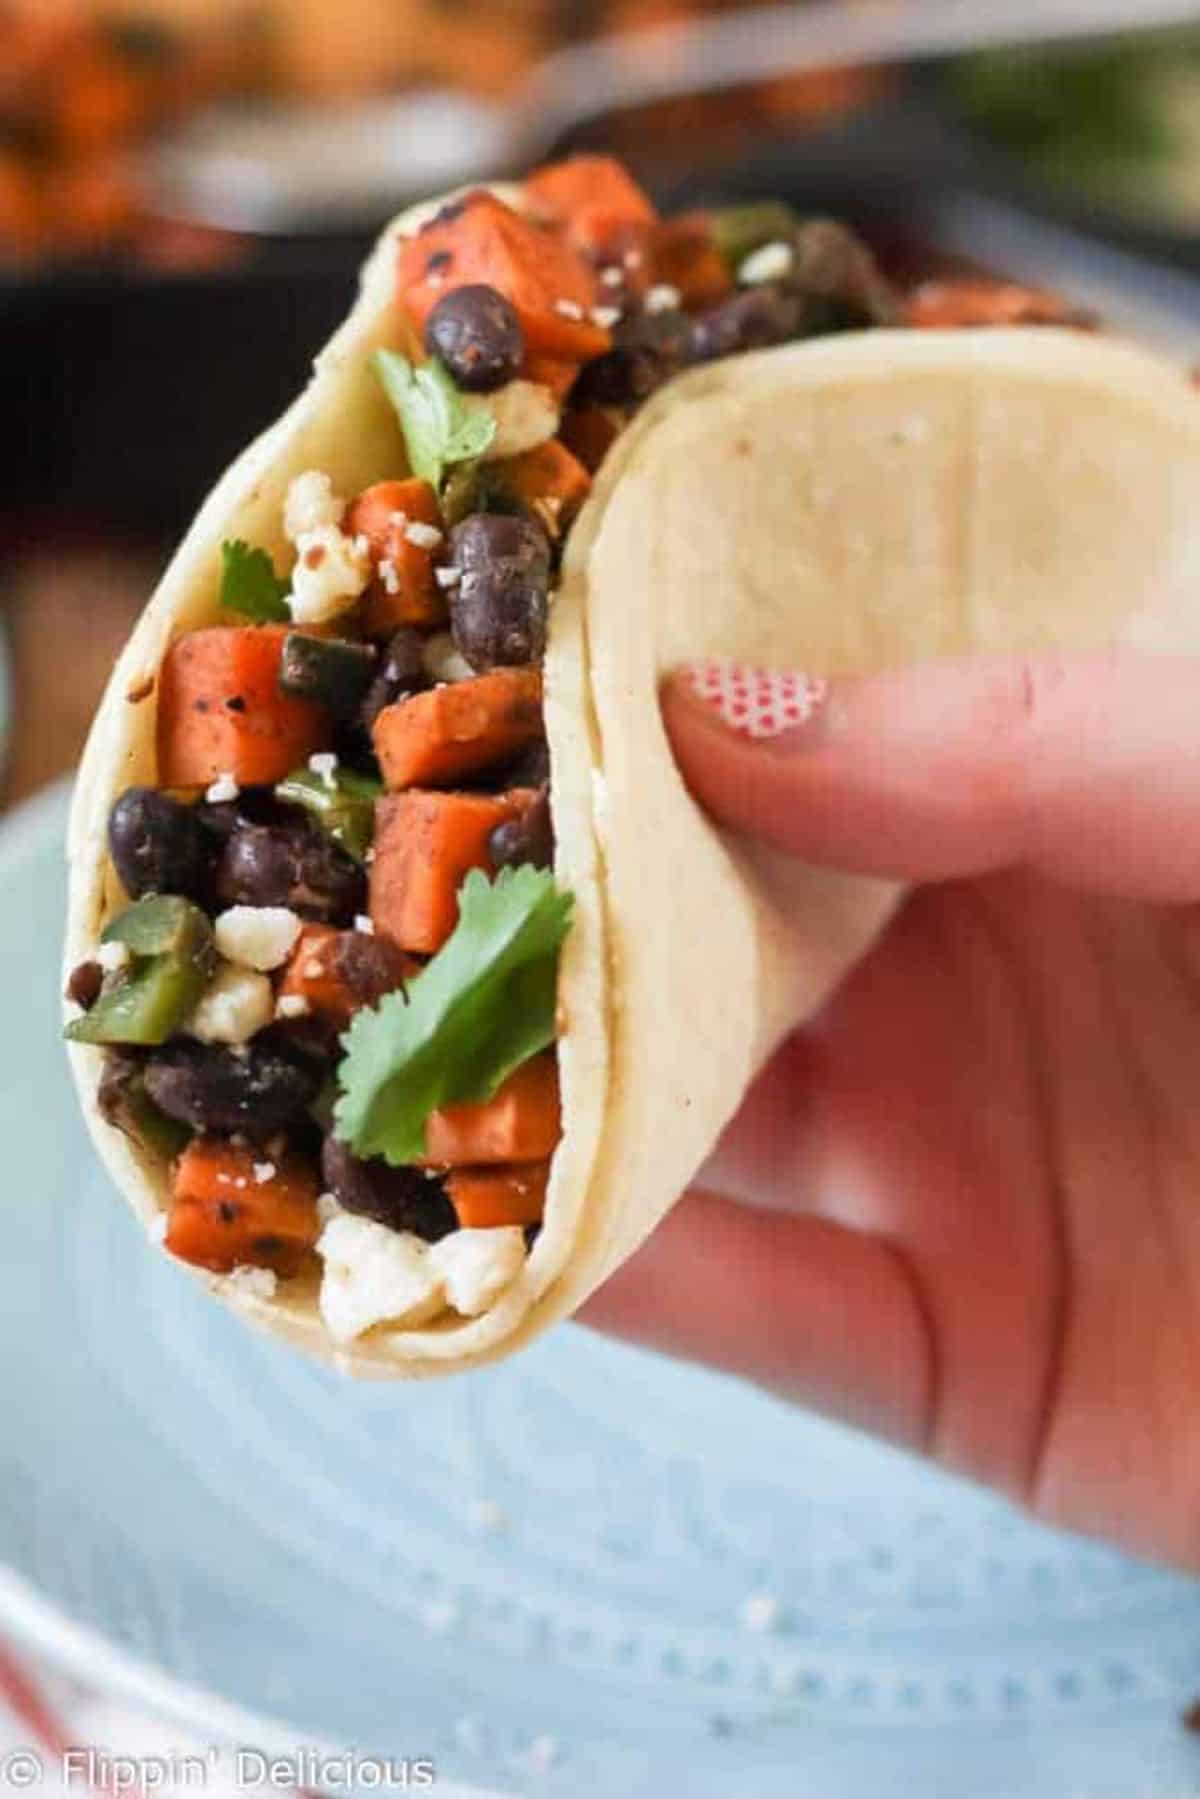 Sweet Potato and Black Bean Taco held by hand.